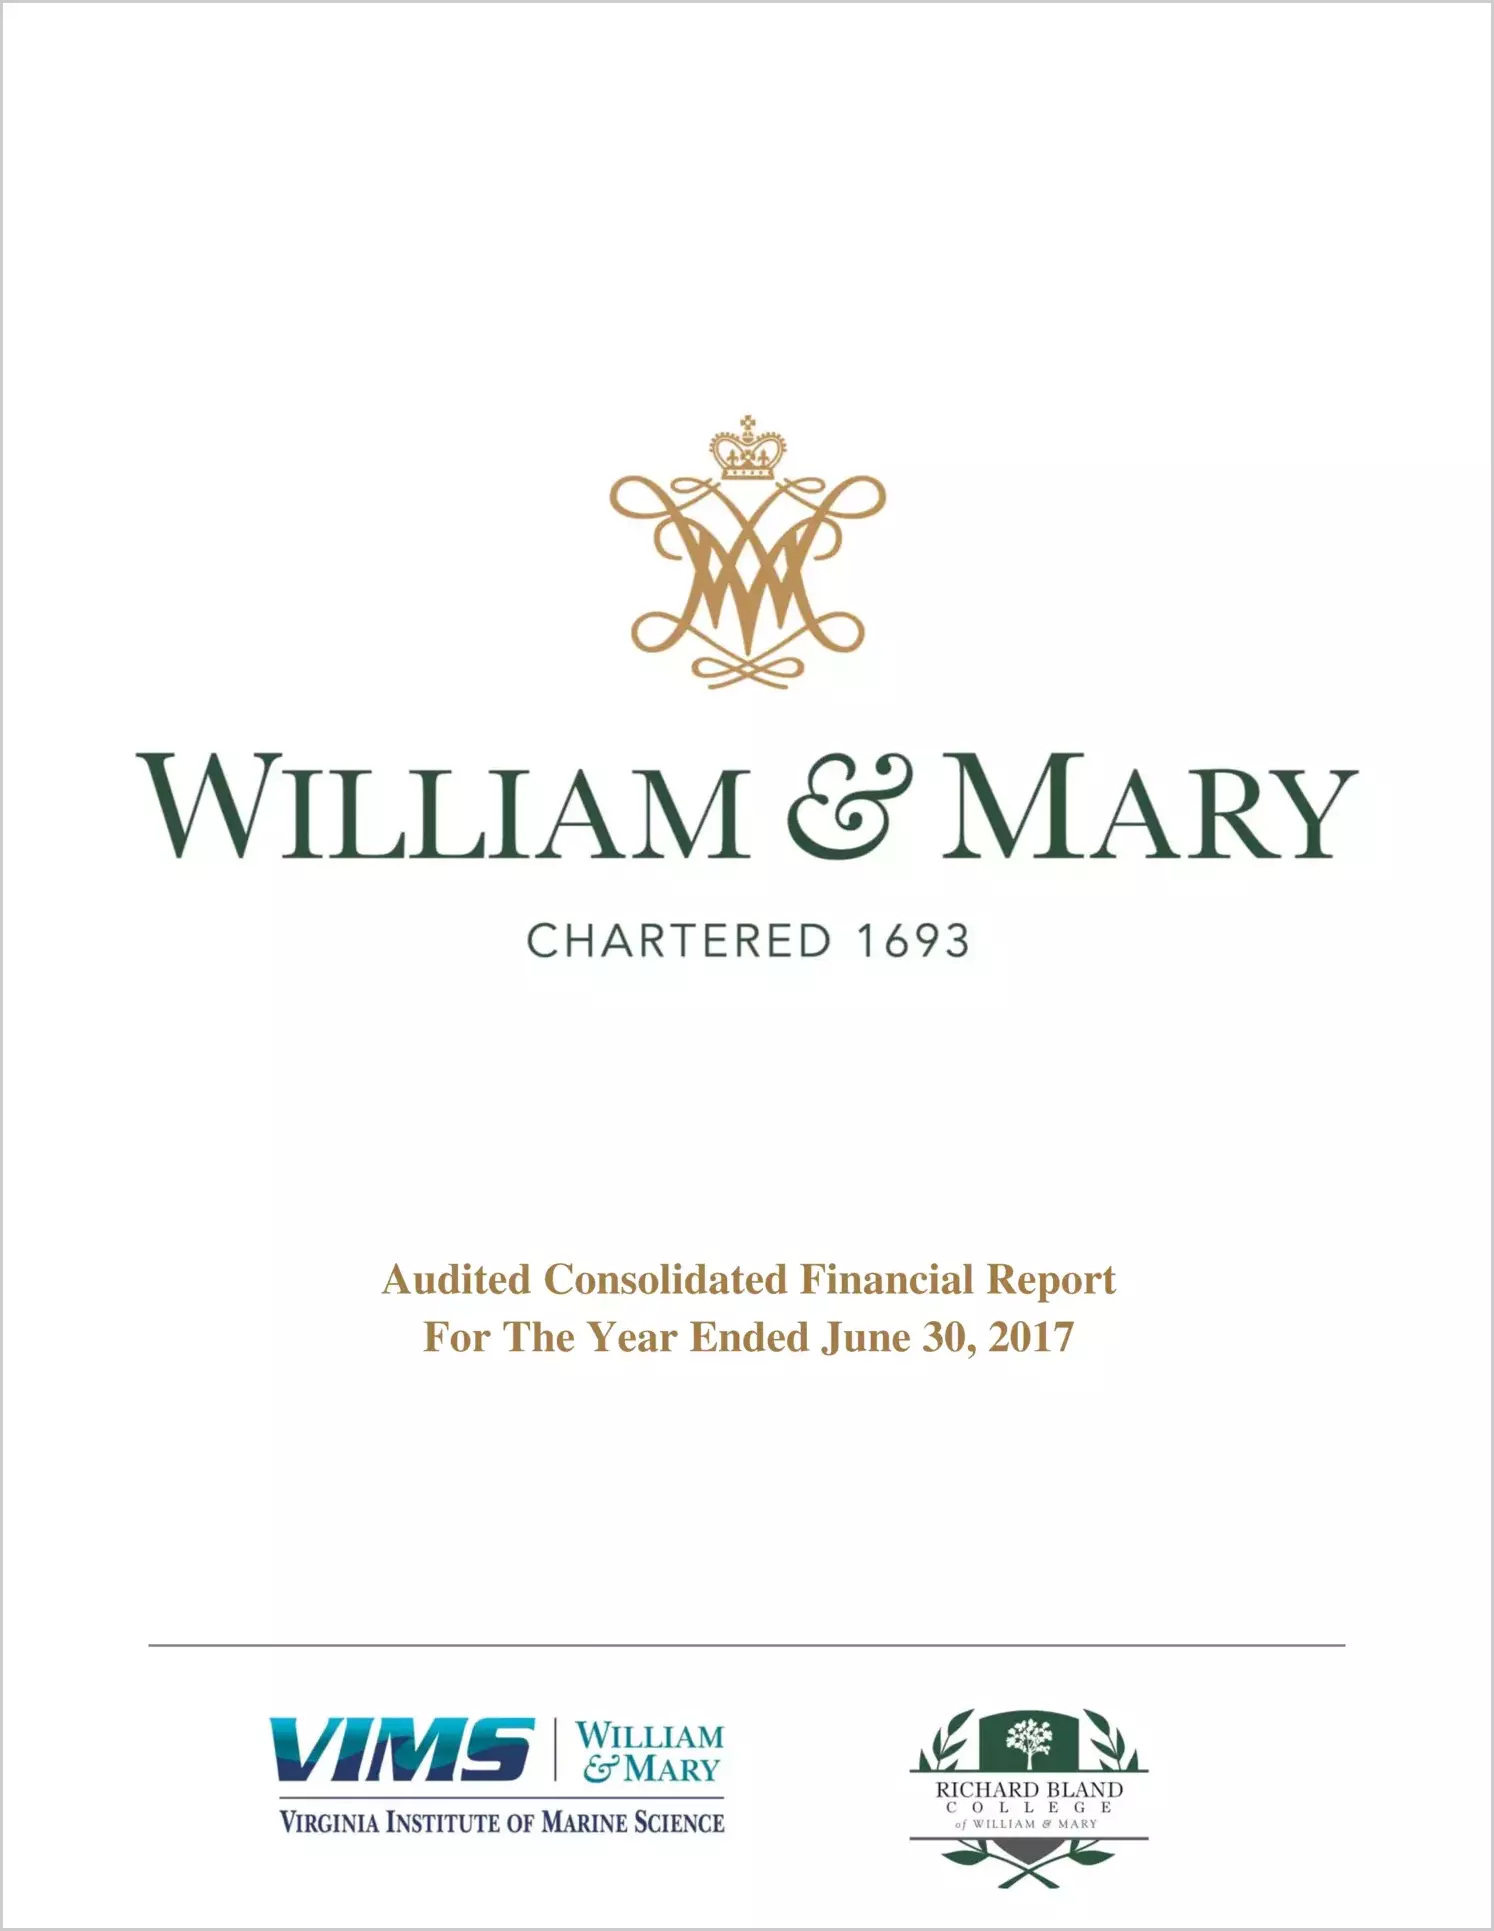 William & Mary, Virginia Institute of Marine Science, and Richard Bland College Financial Statements for the year ended June 30, 2017